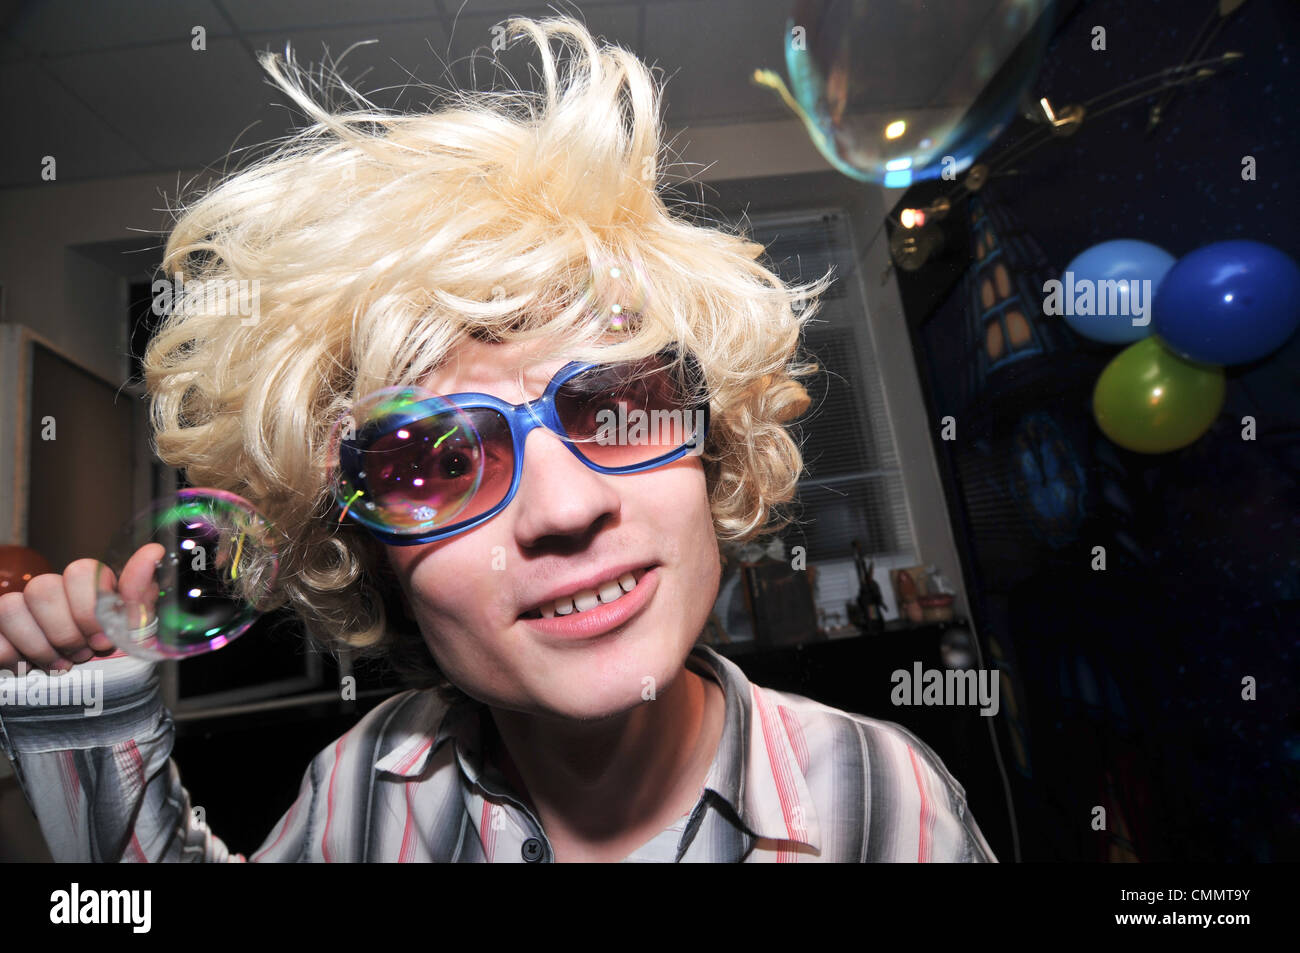 Young man wearing blond wig looks very drunk Stock Photo